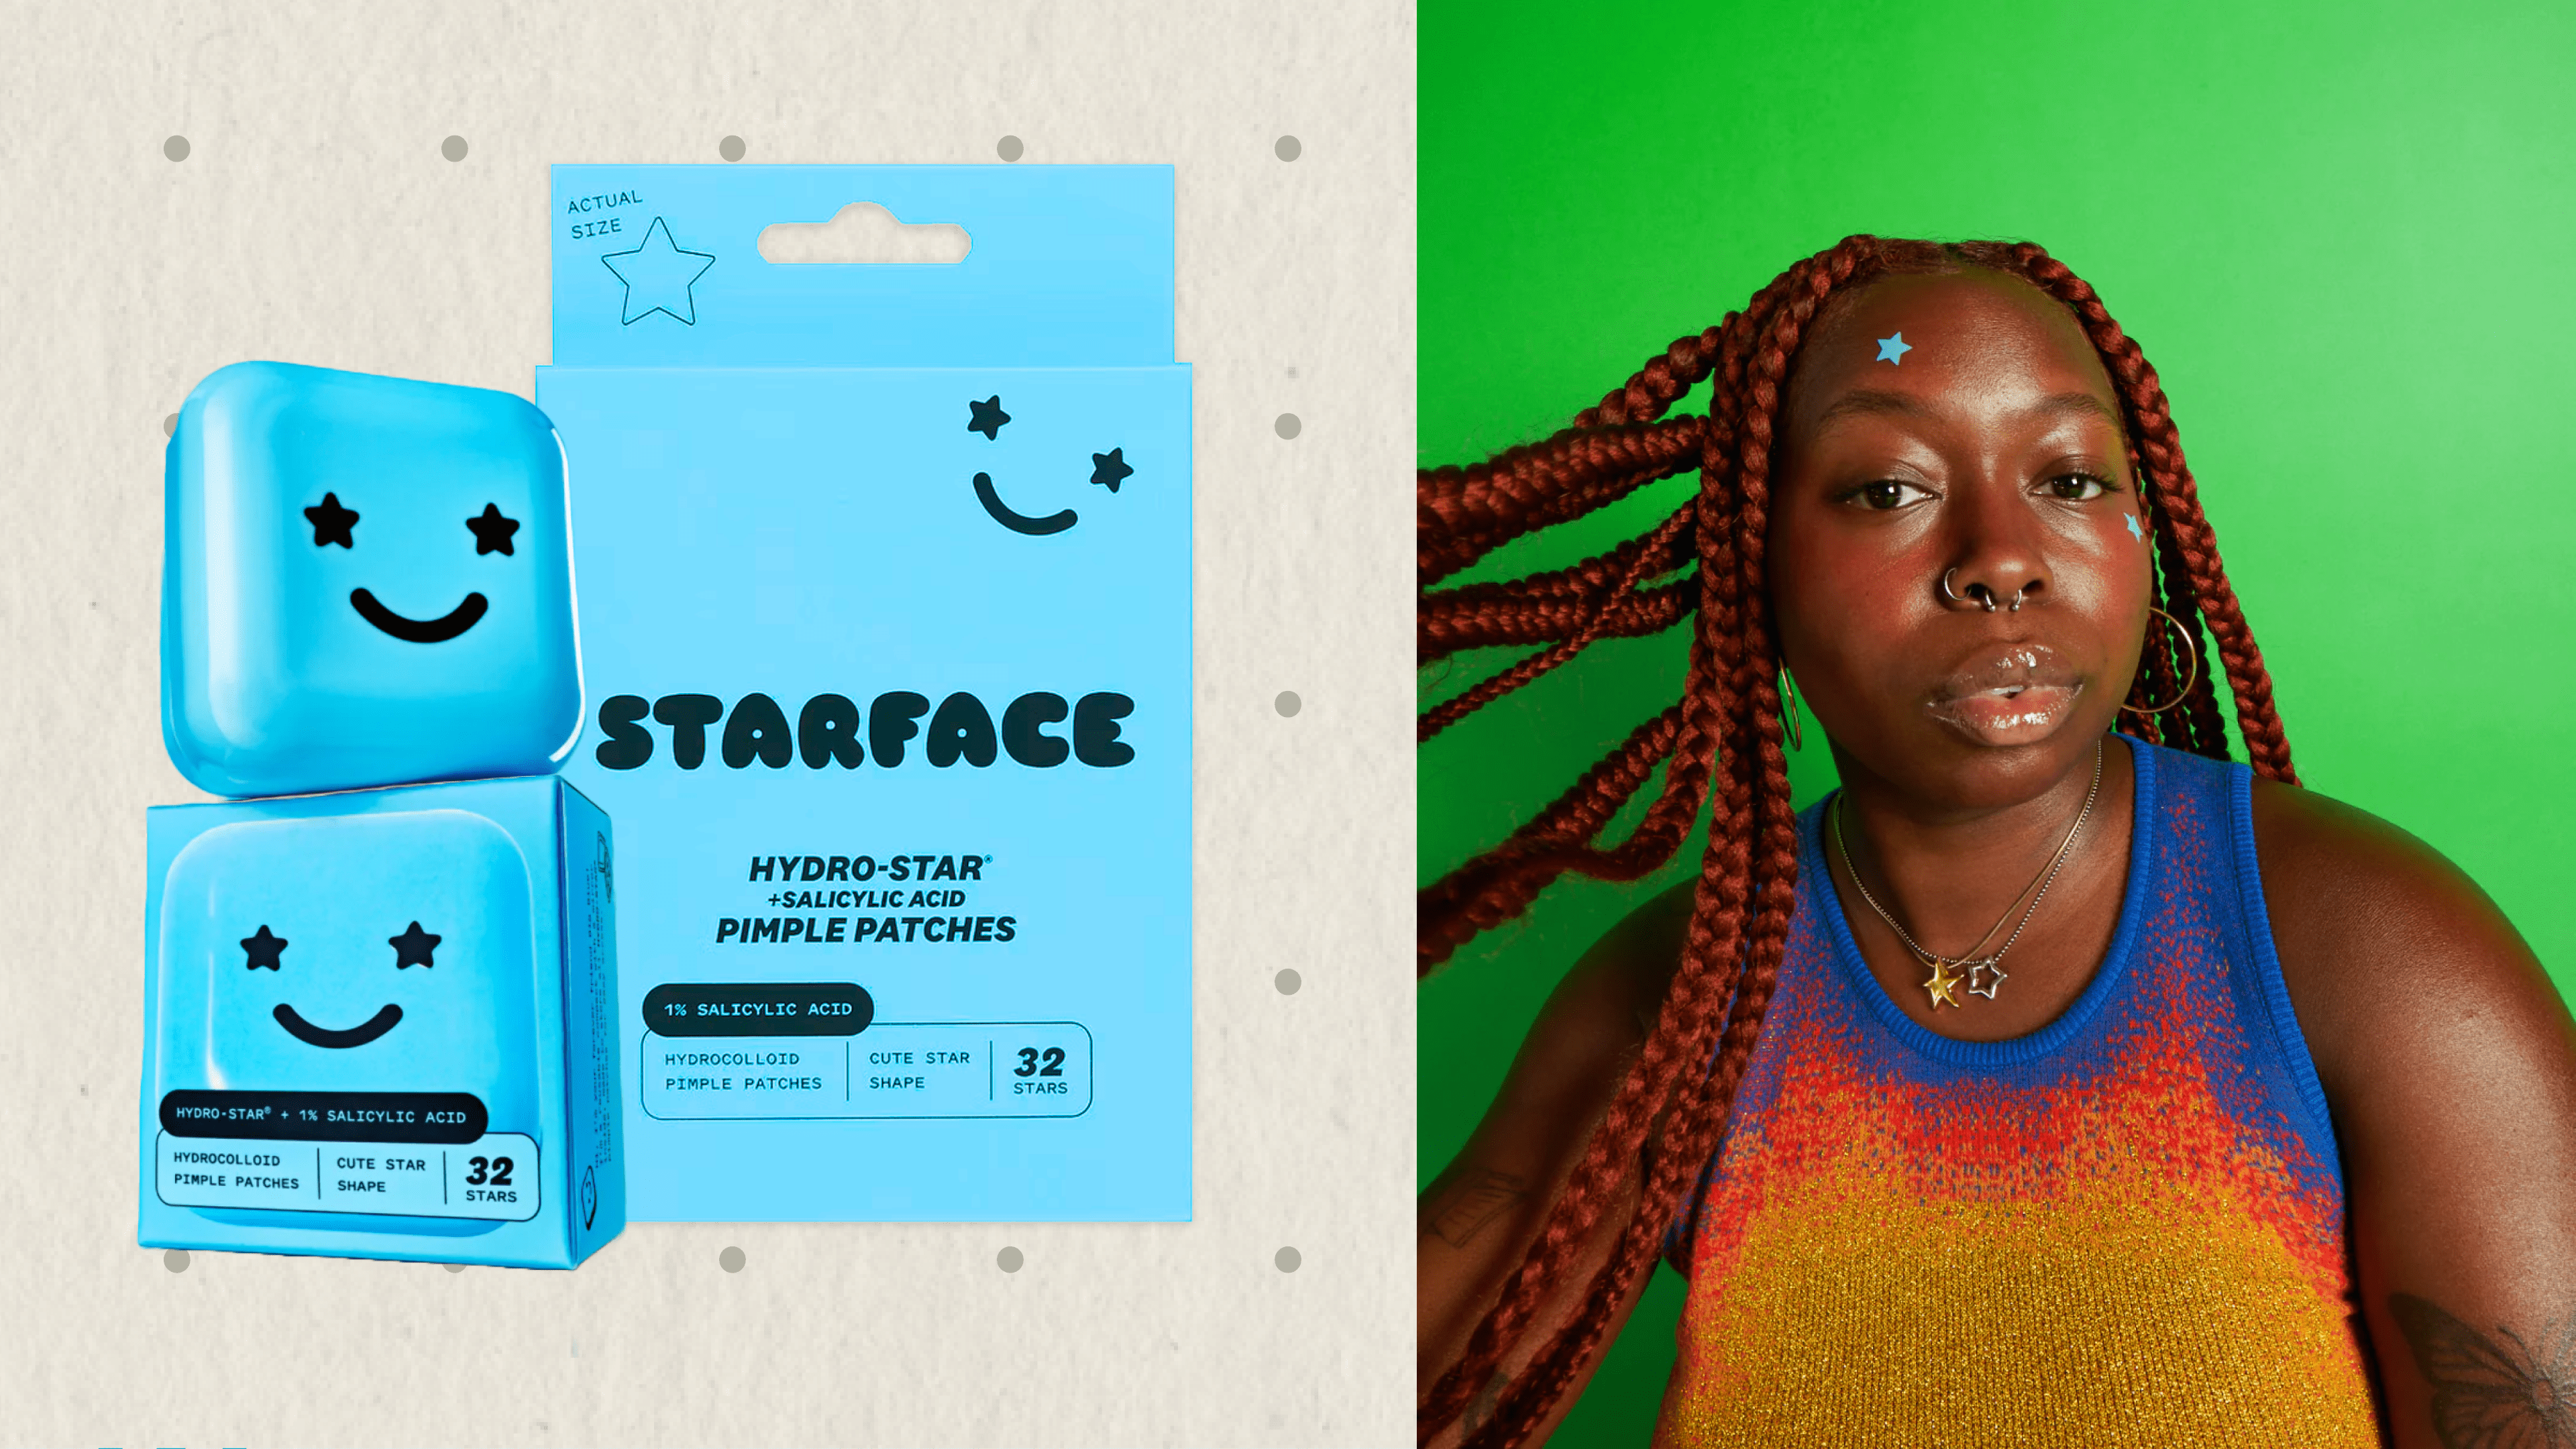 Starface pimple patches